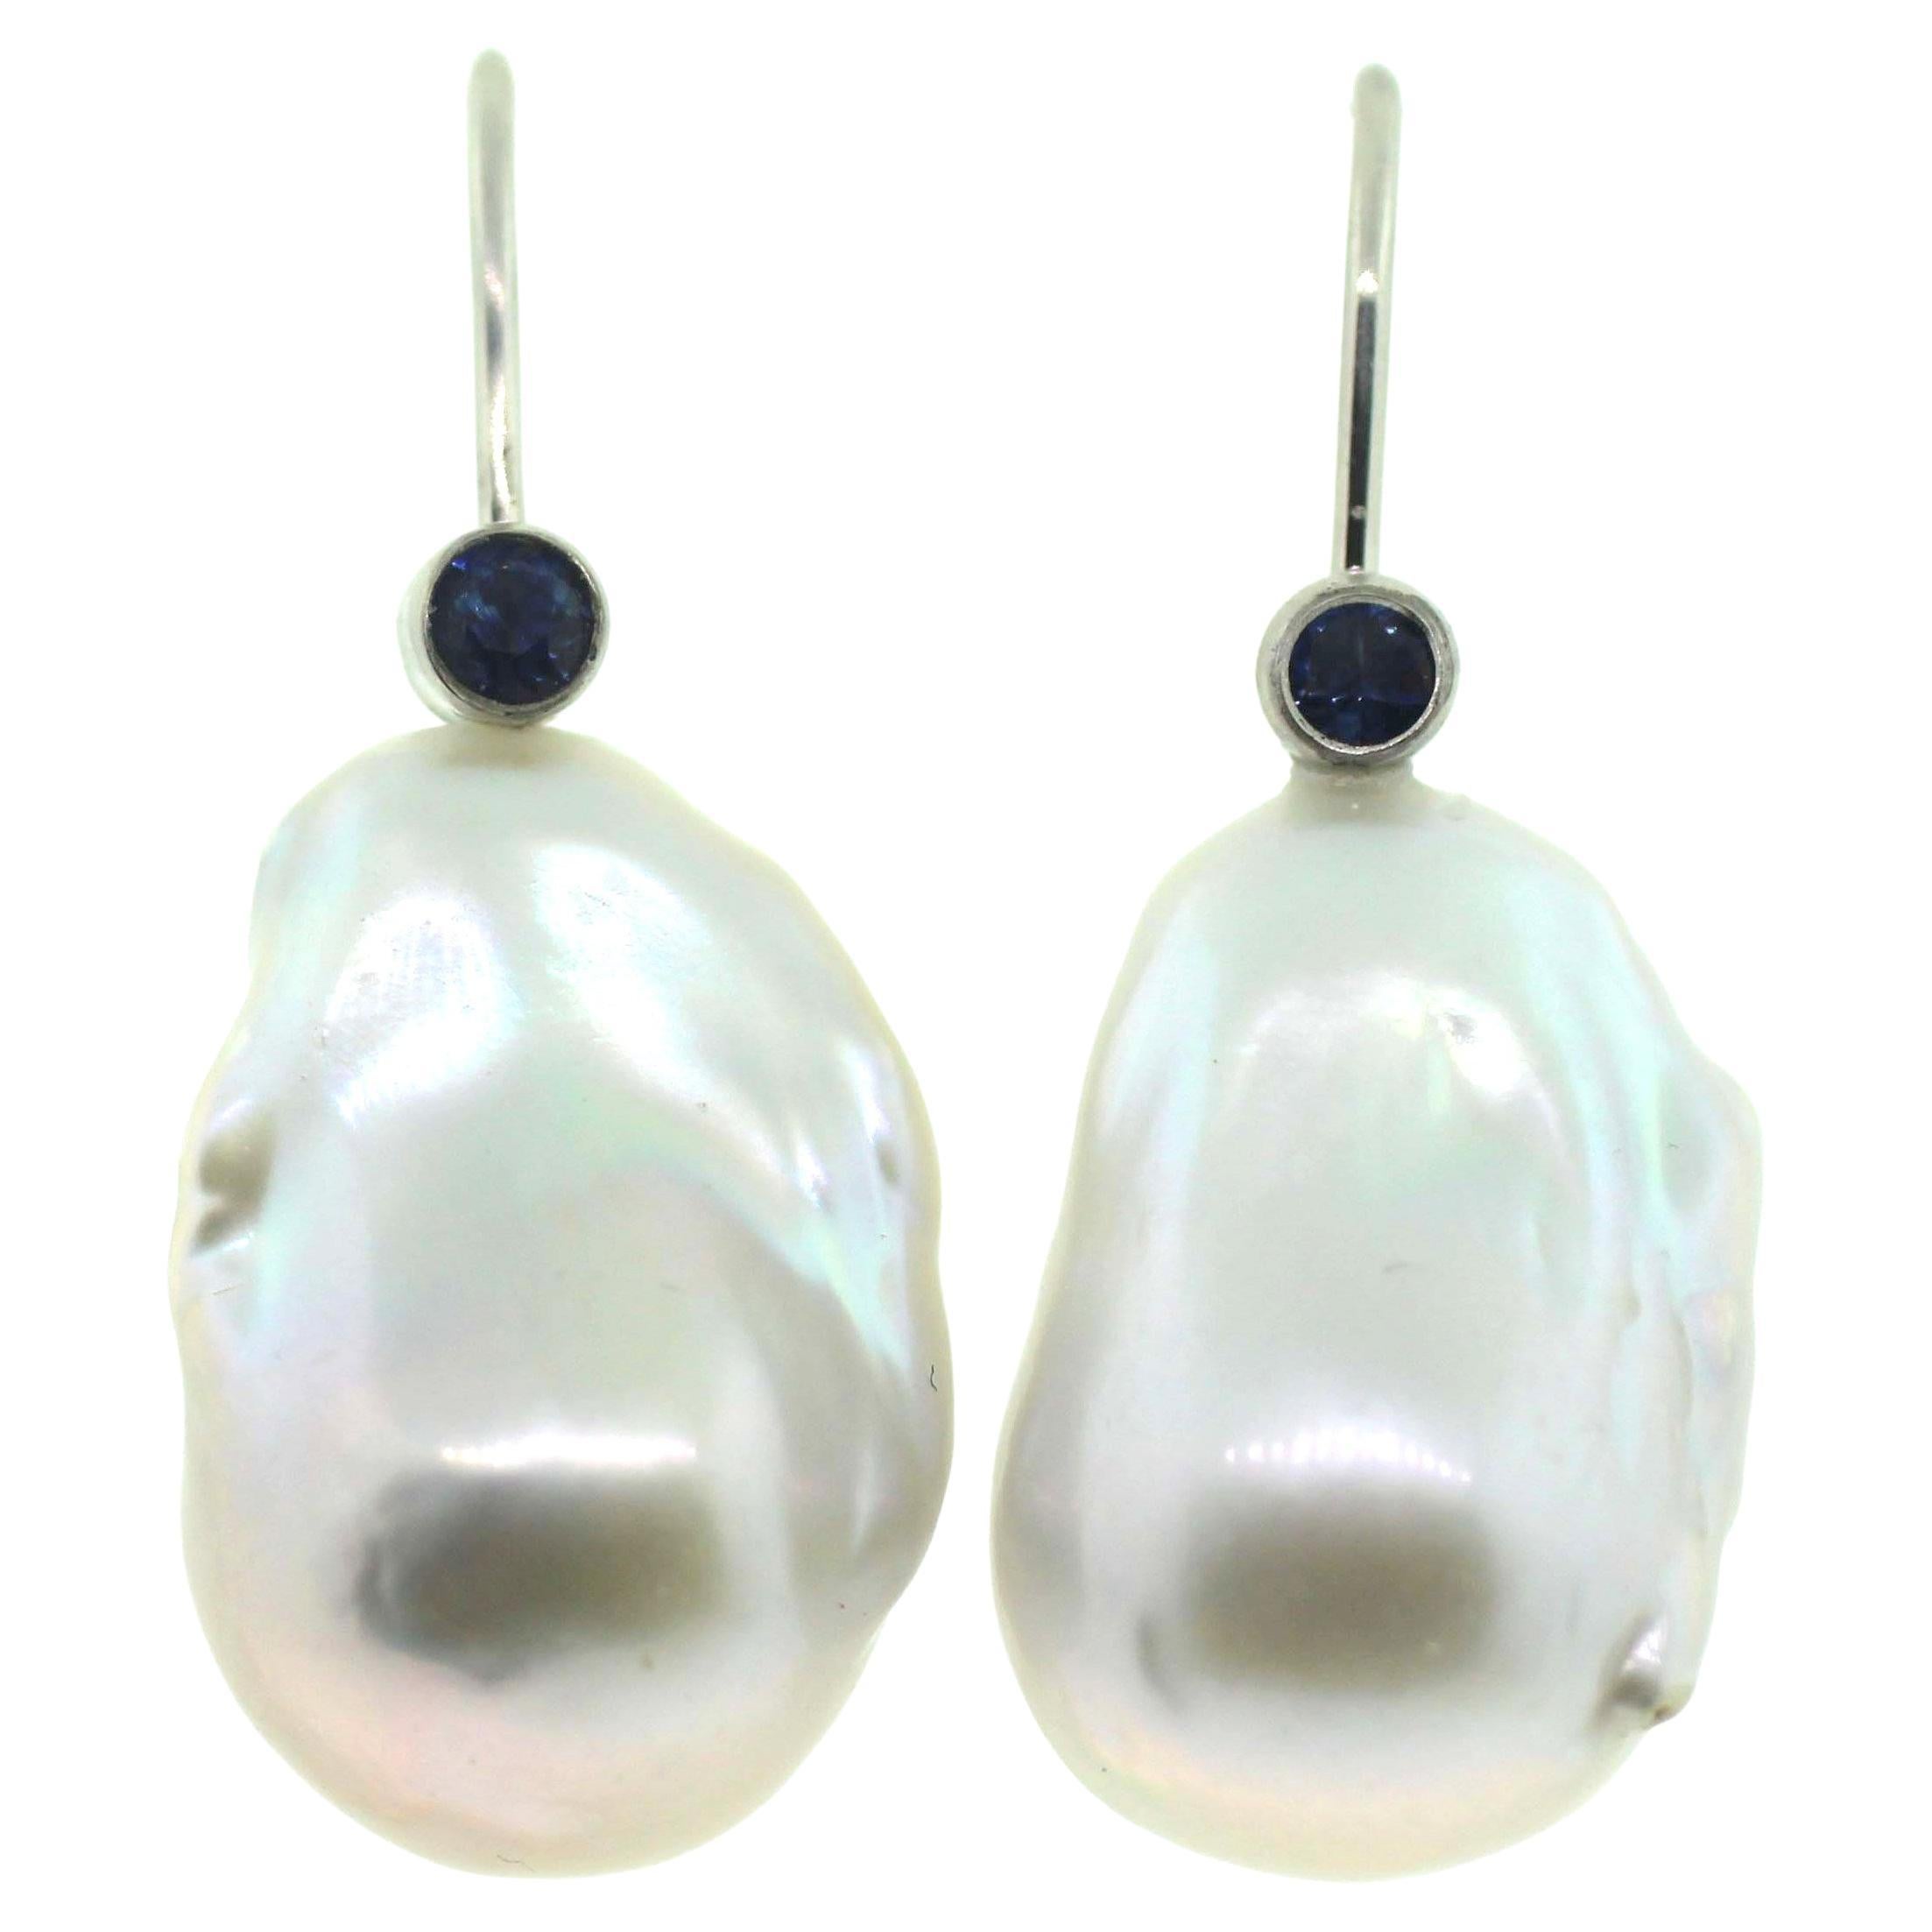 Hakimoto 18k White Gold 22x15 mm White Baroque Pearl Earrings with Blue Sapphire For Sale